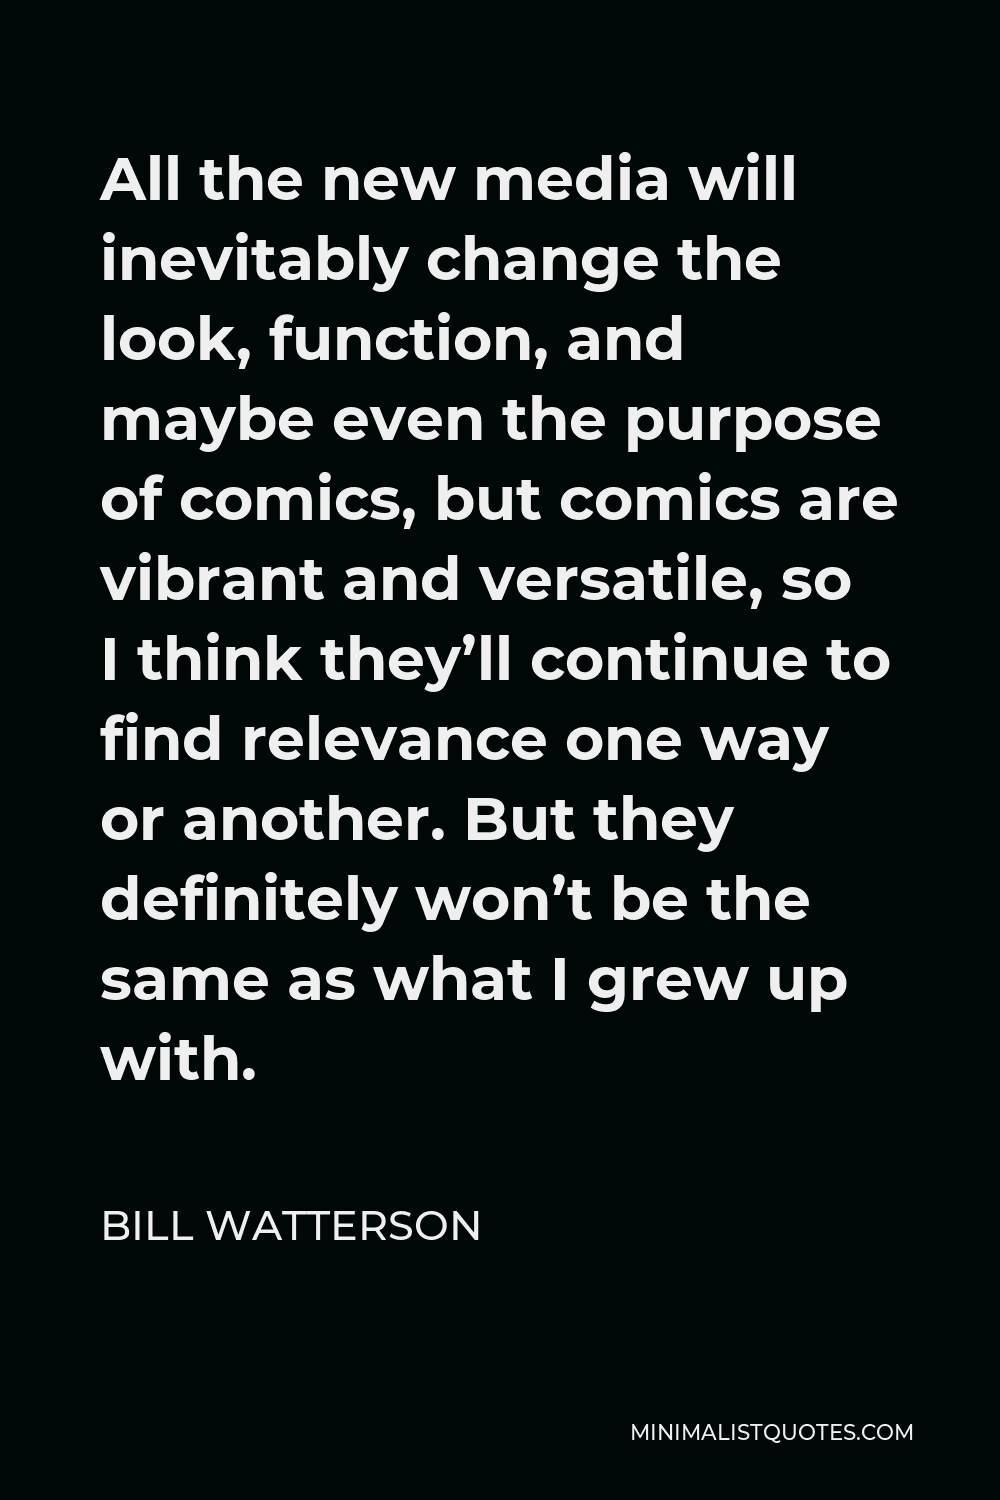 Bill Watterson Quote - All the new media will inevitably change the look, function, and maybe even the purpose of comics, but comics are vibrant and versatile, so I think they’ll continue to find relevance one way or another. But they definitely won’t be the same as what I grew up with.